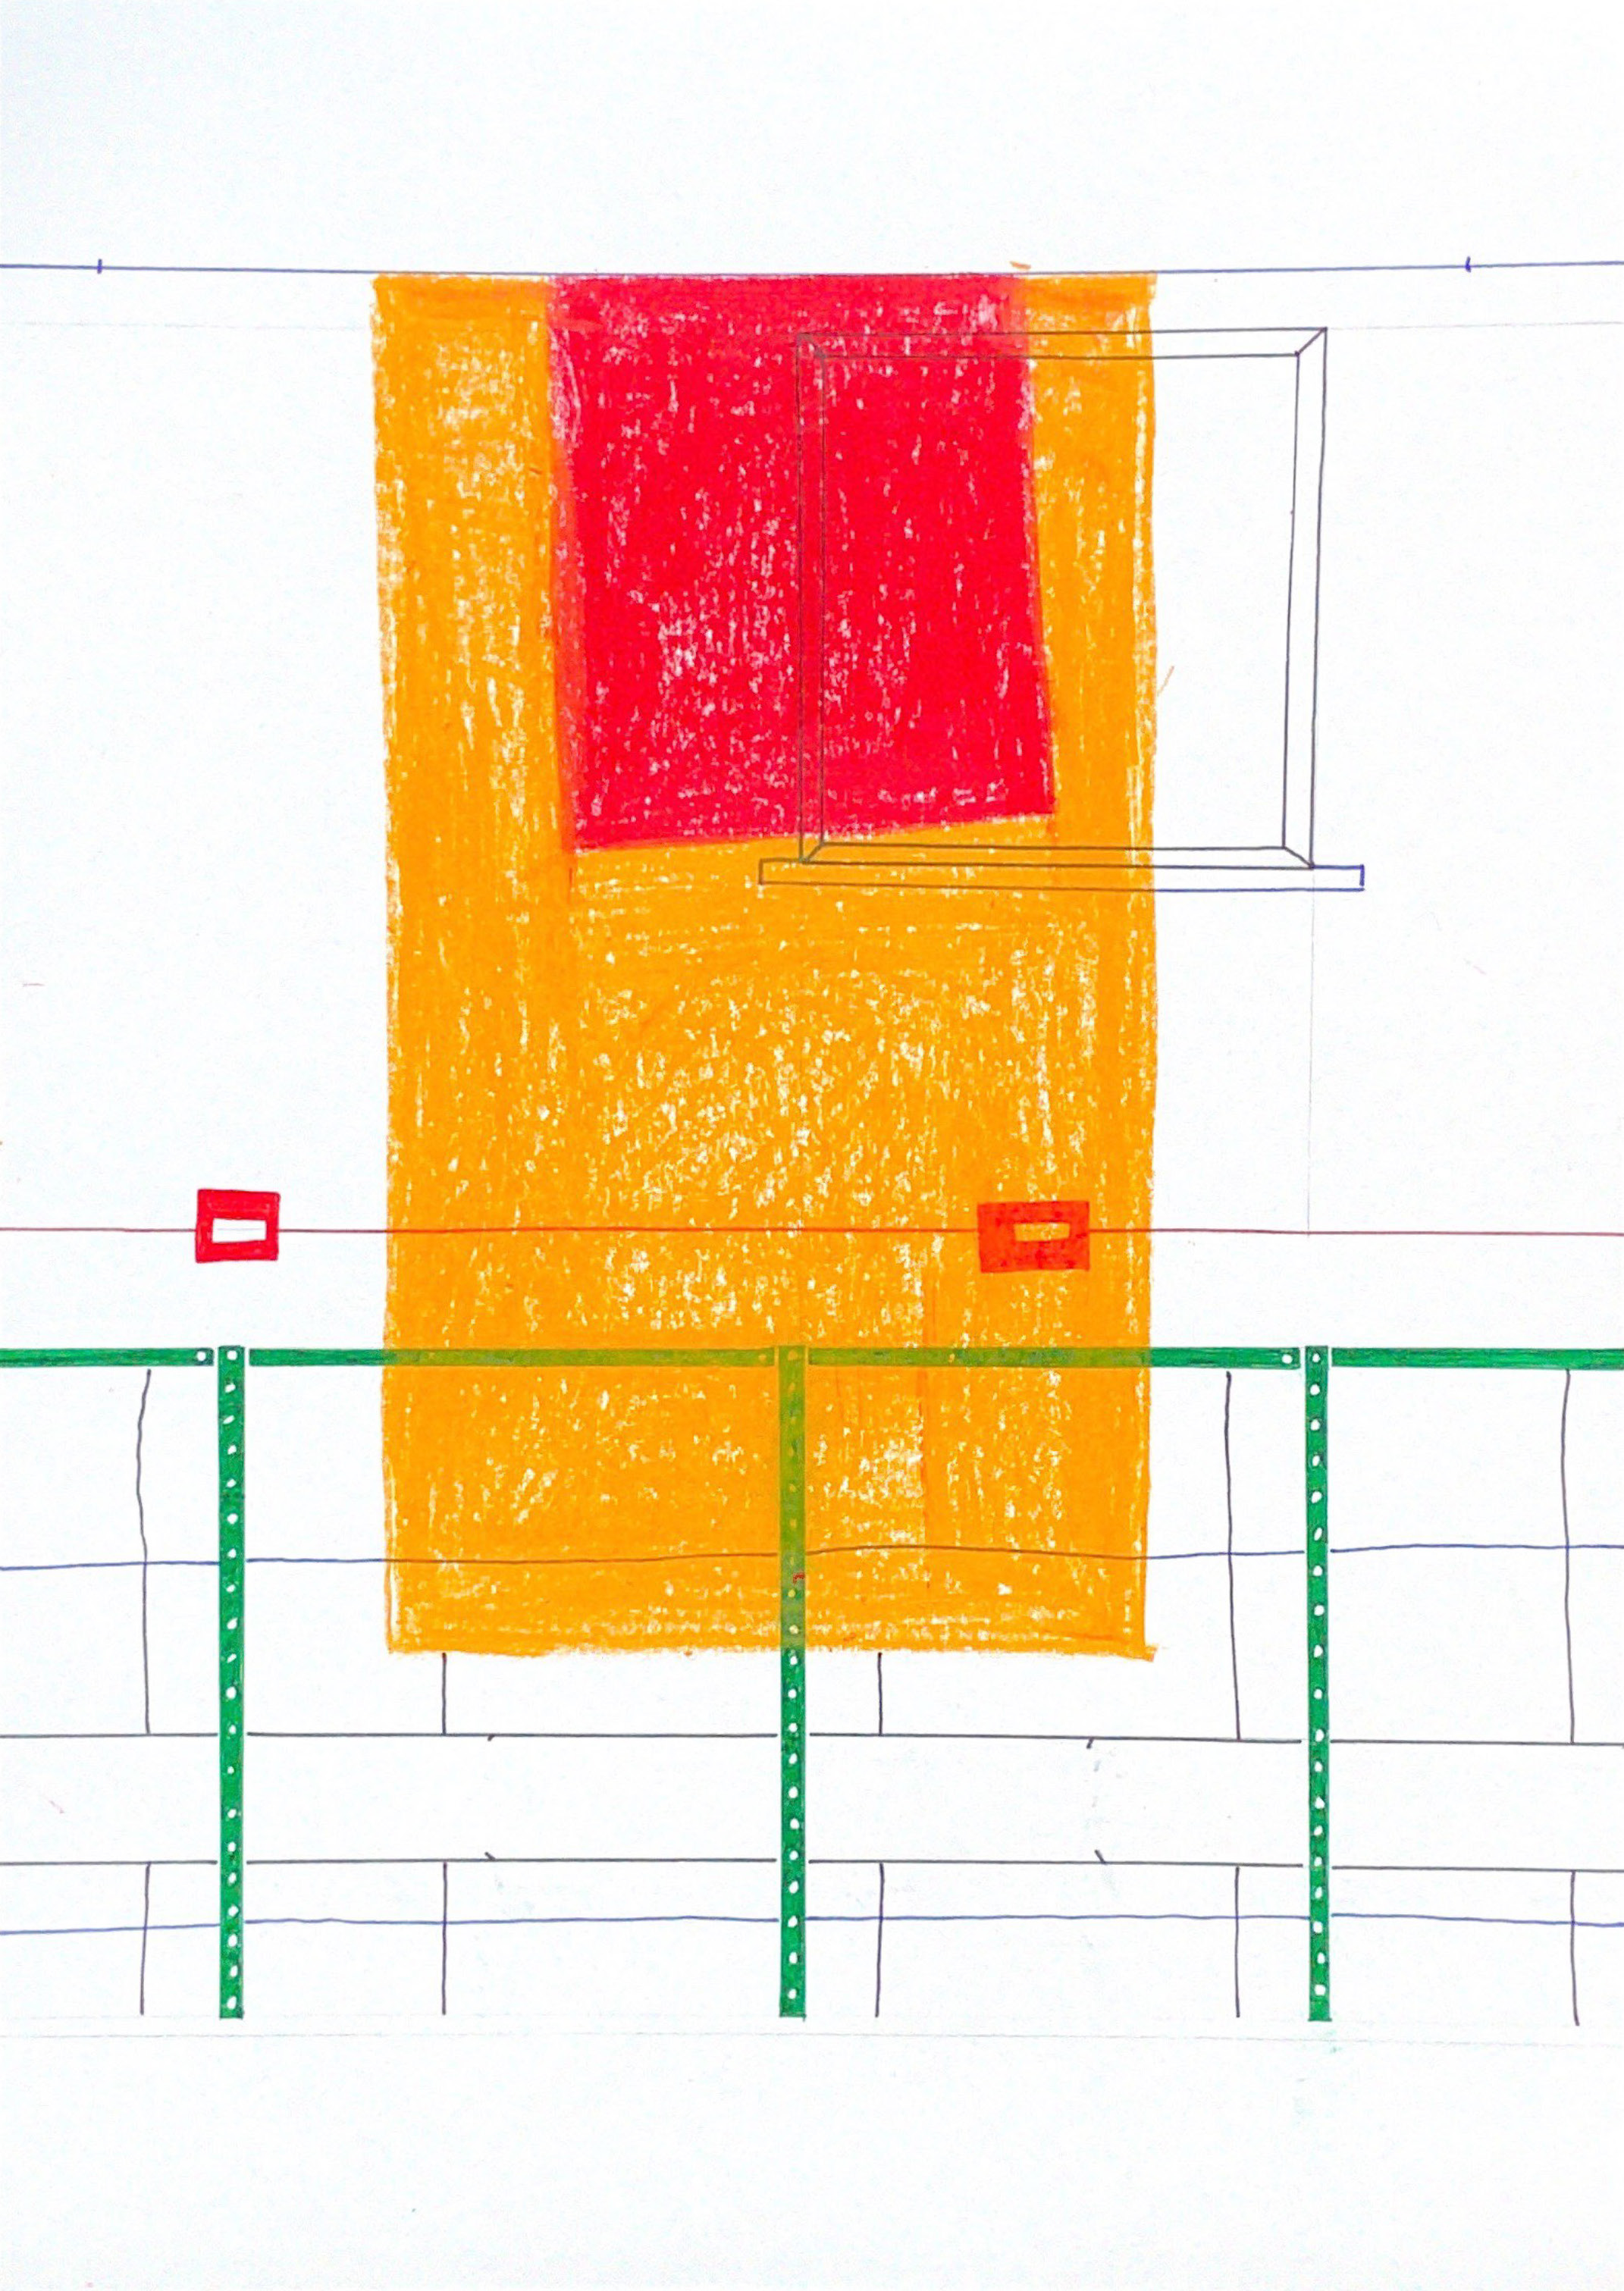 pen and pastel drawing of hanging sheets in red and orange in front of horizontal green shelving